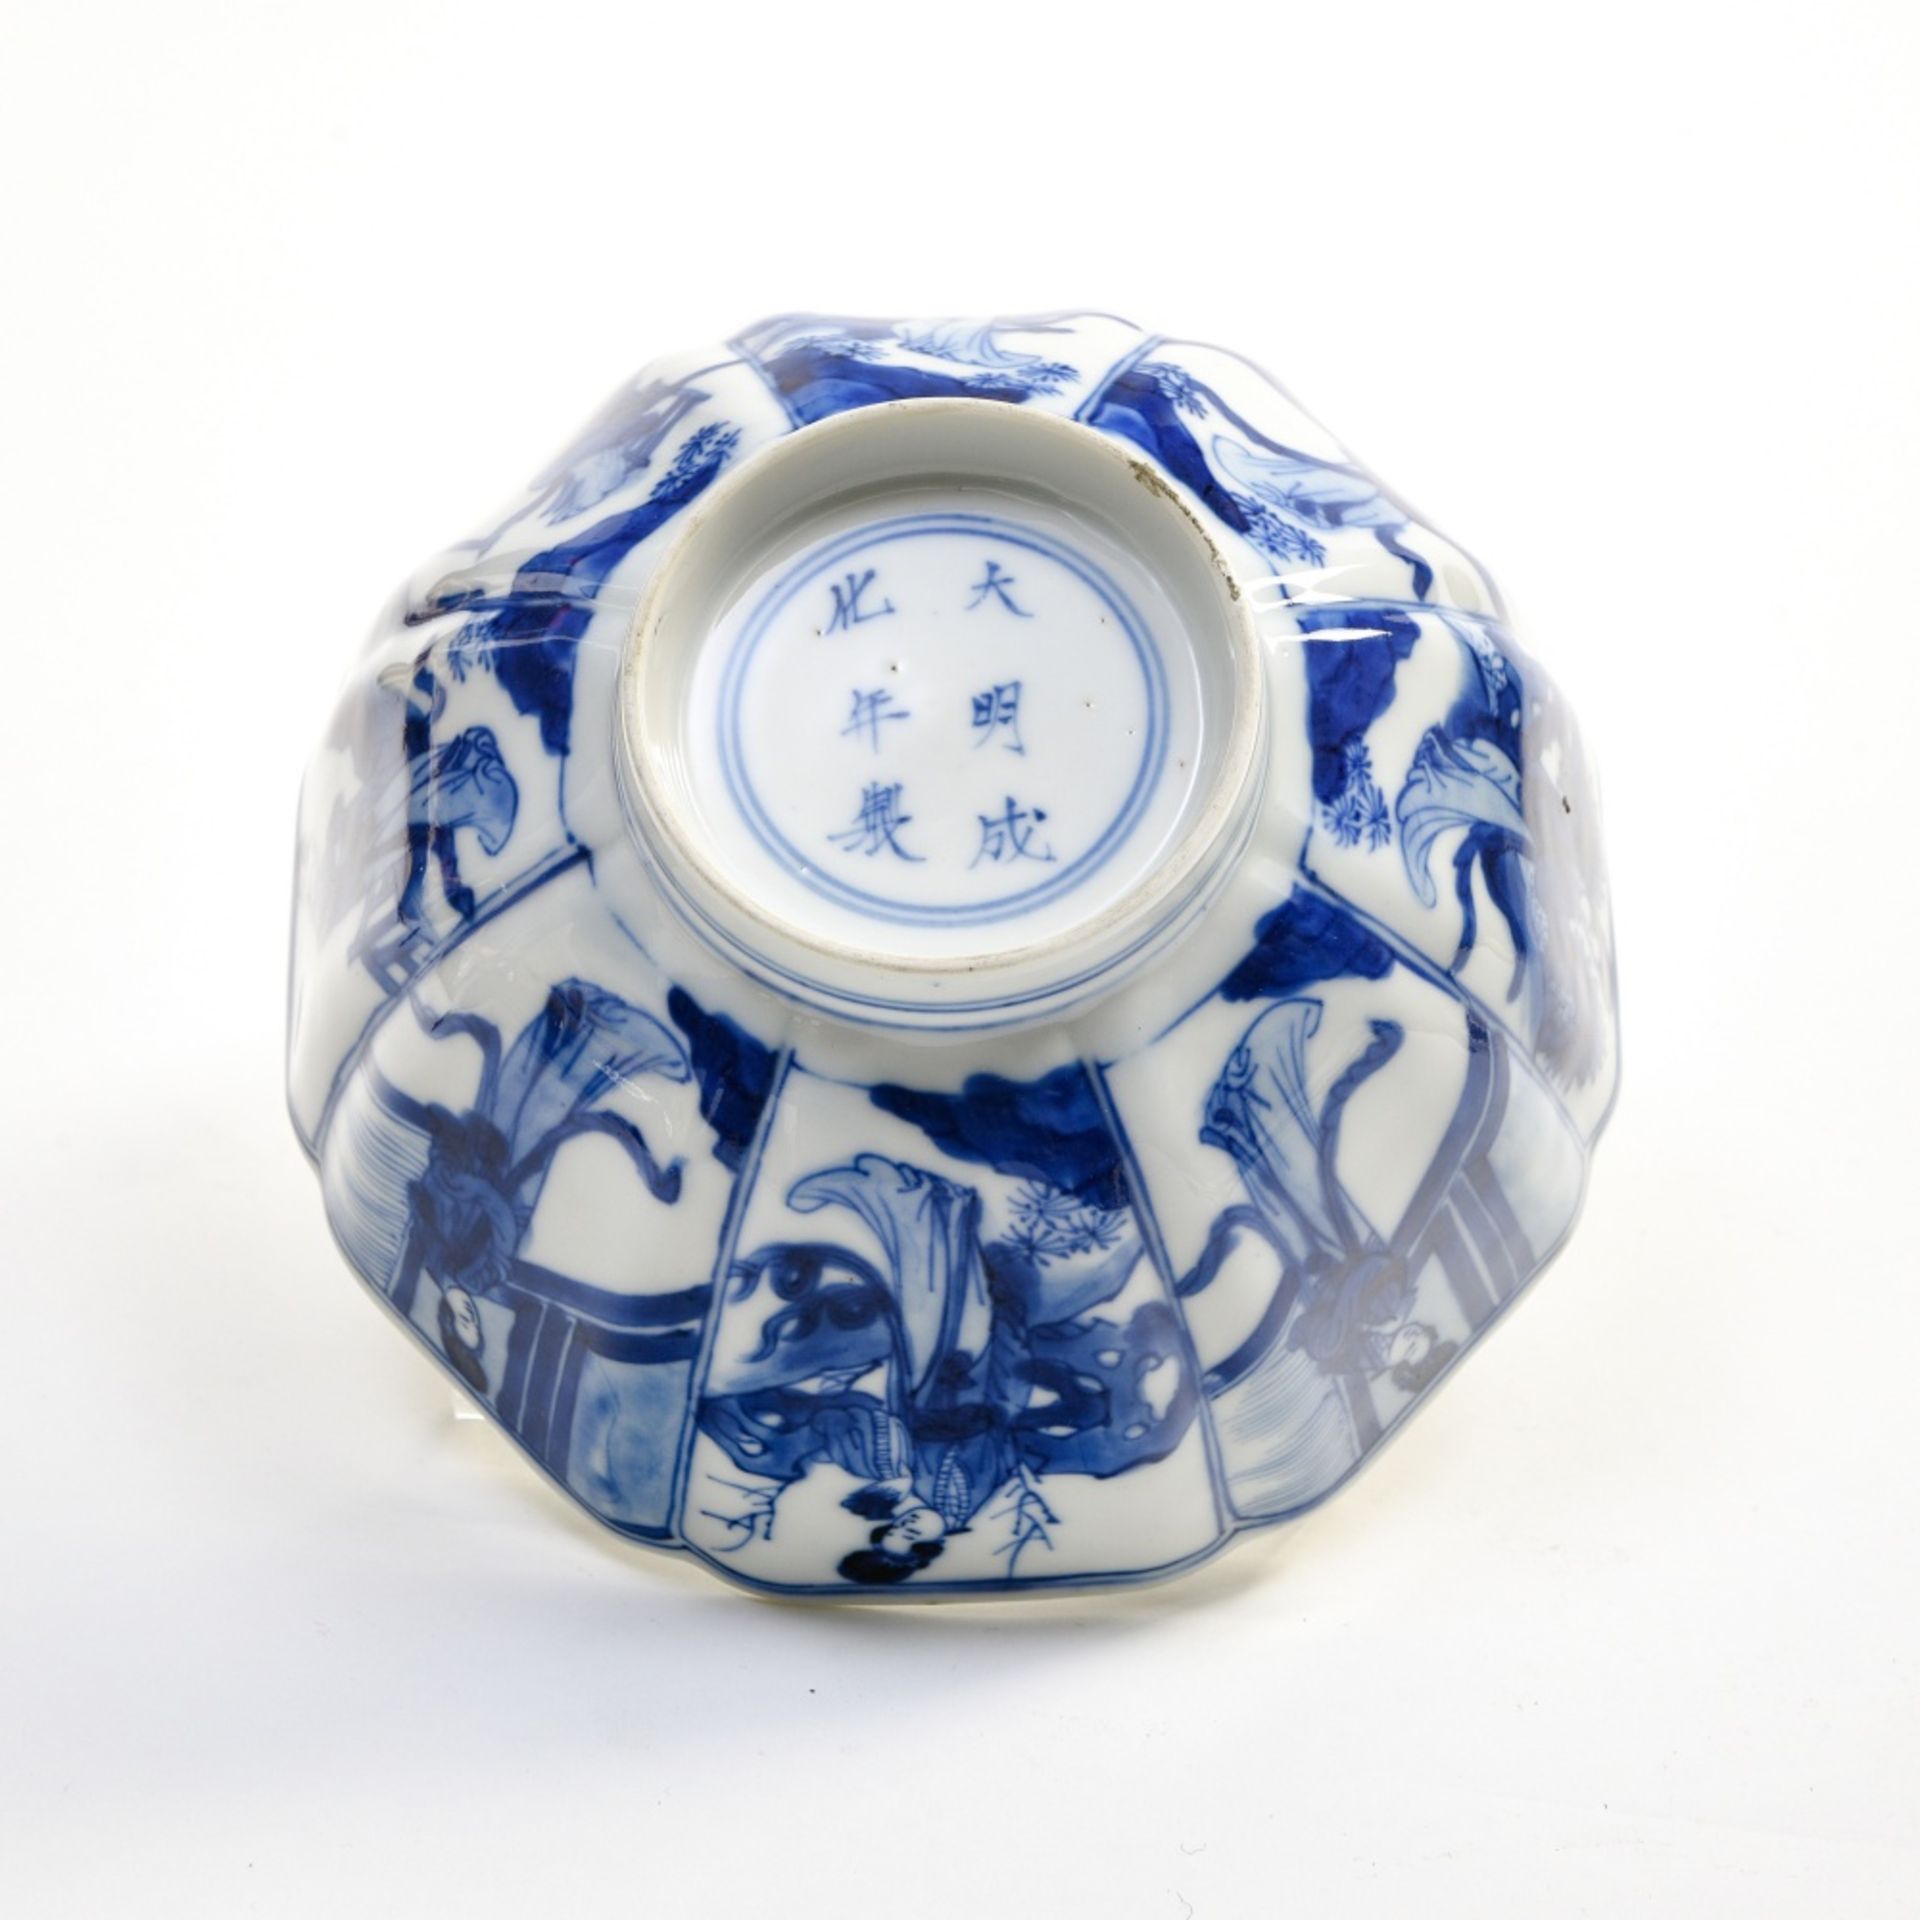 China, 18th century or earlier Multifaceted bowl, Blue and white porcelain decorated with children - Image 6 of 6